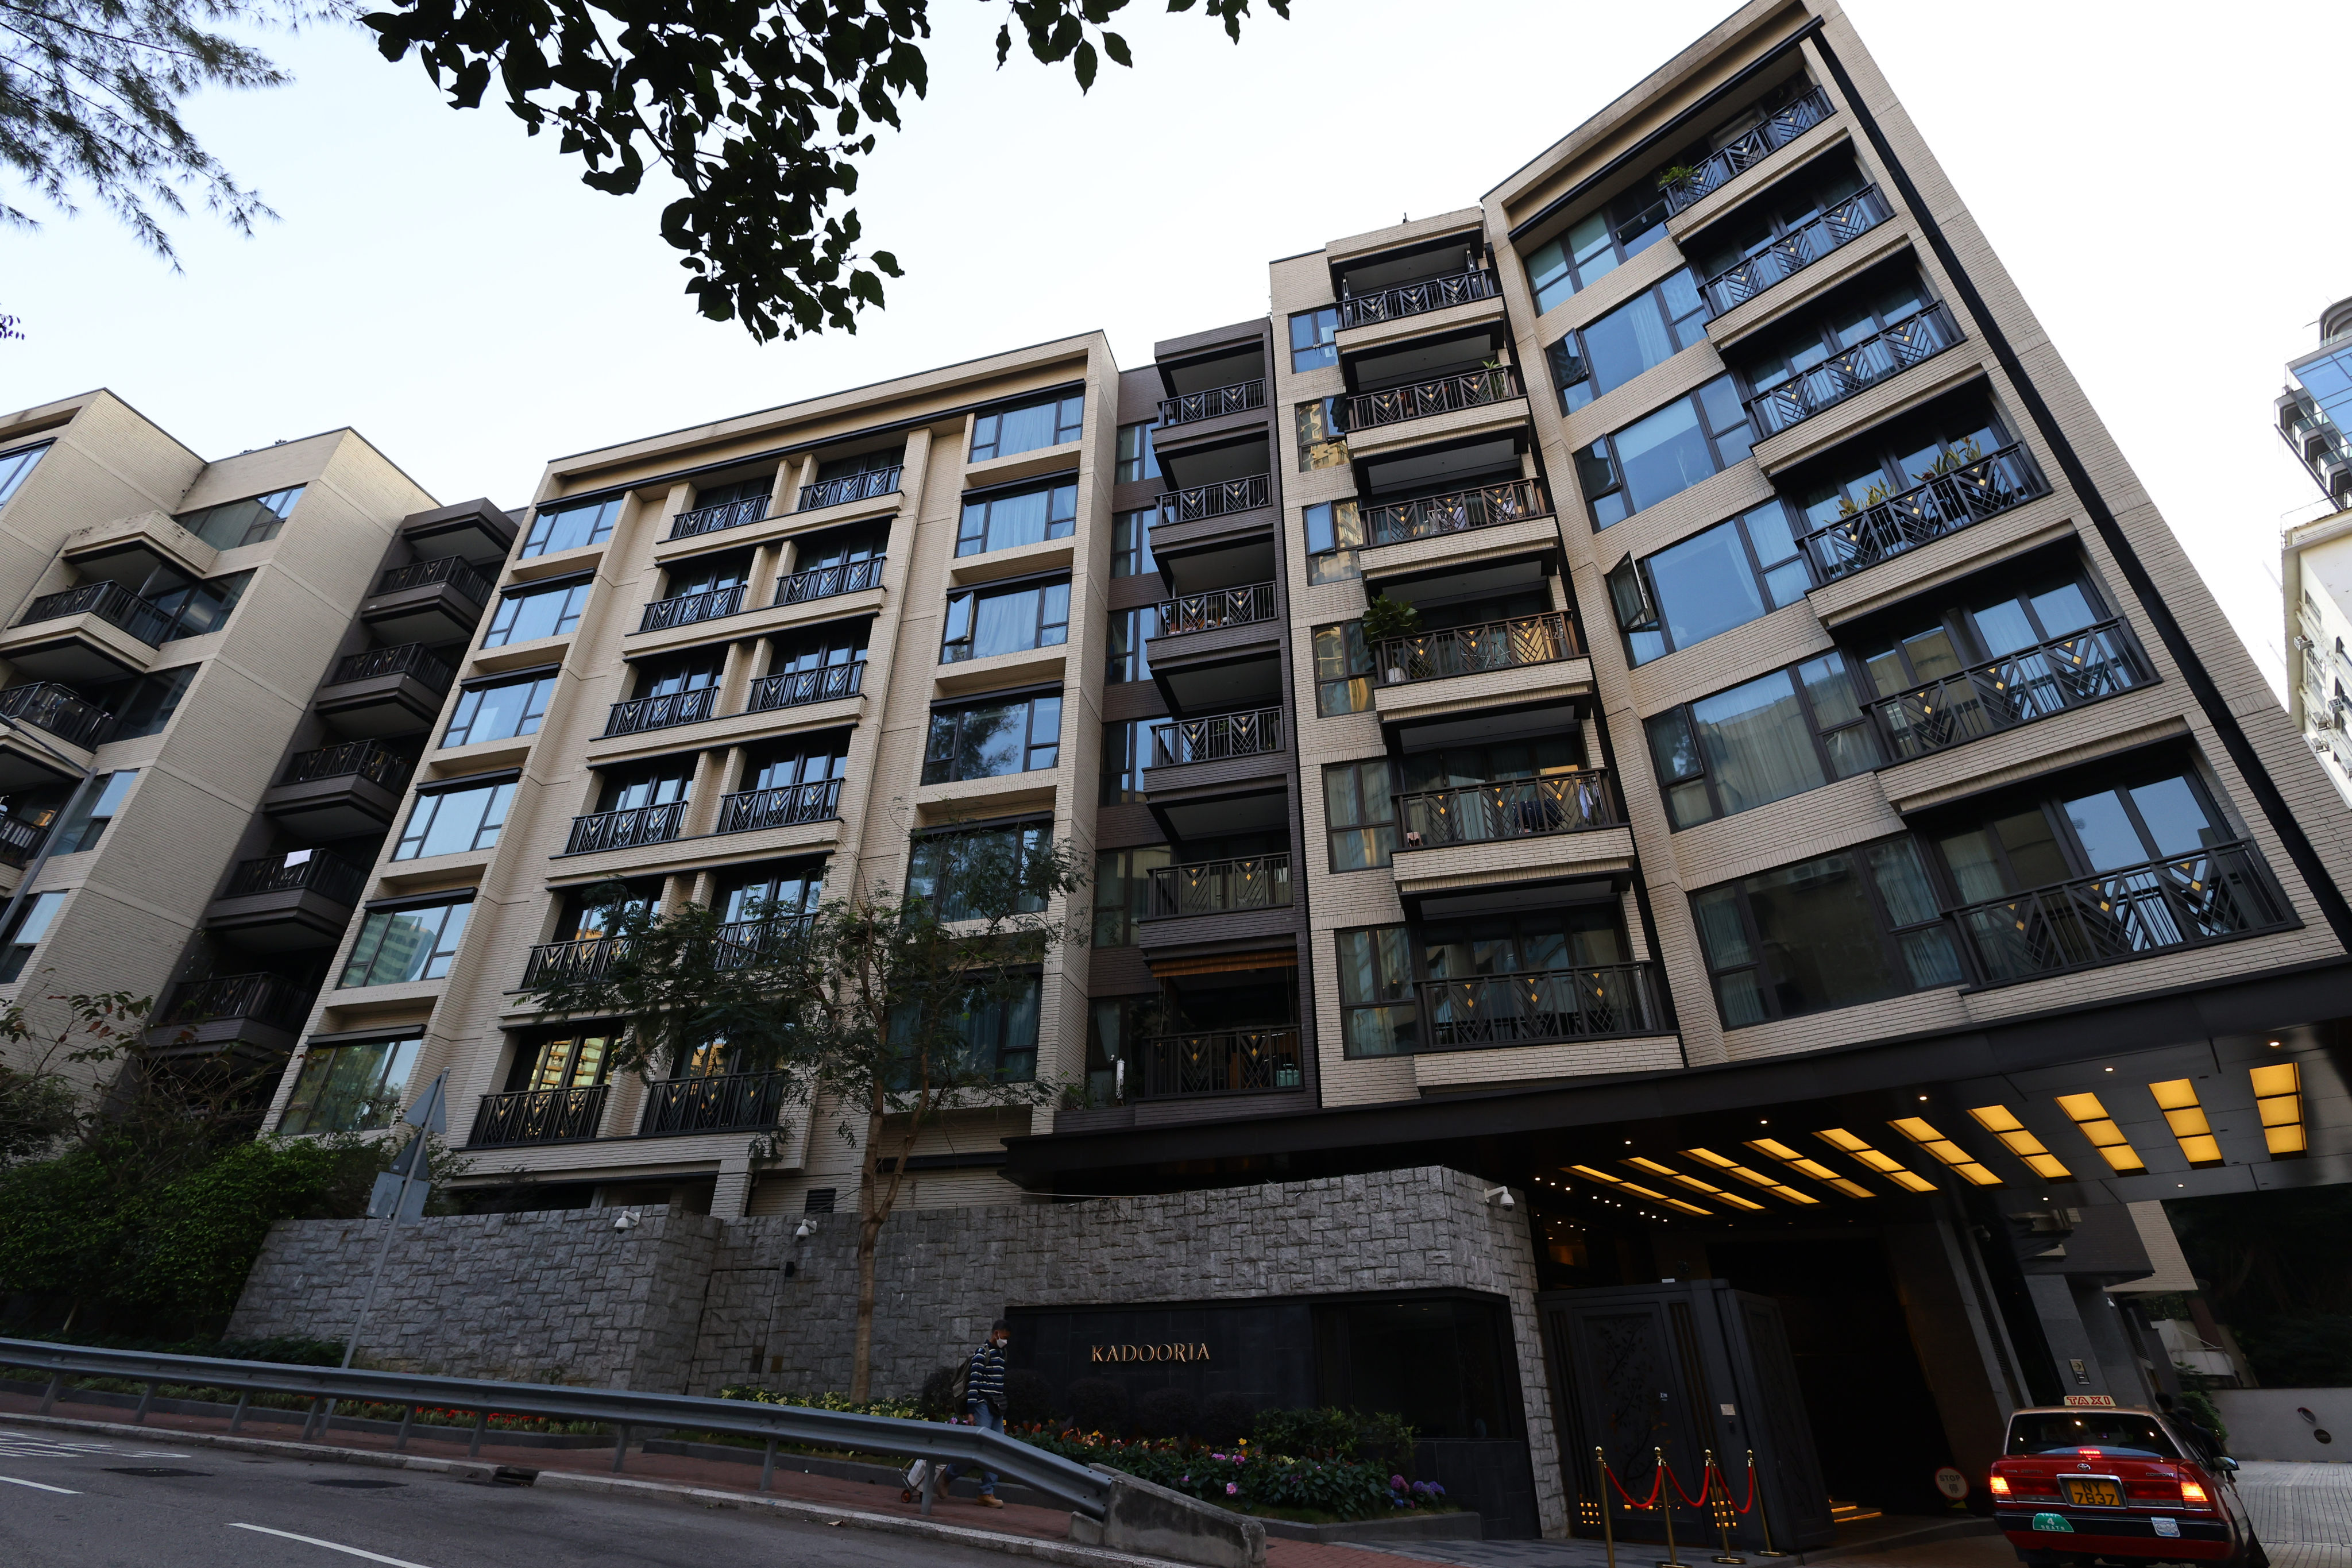 The flat is located in a luxury development in Ho Man Tin. Photo: Dickson Lee